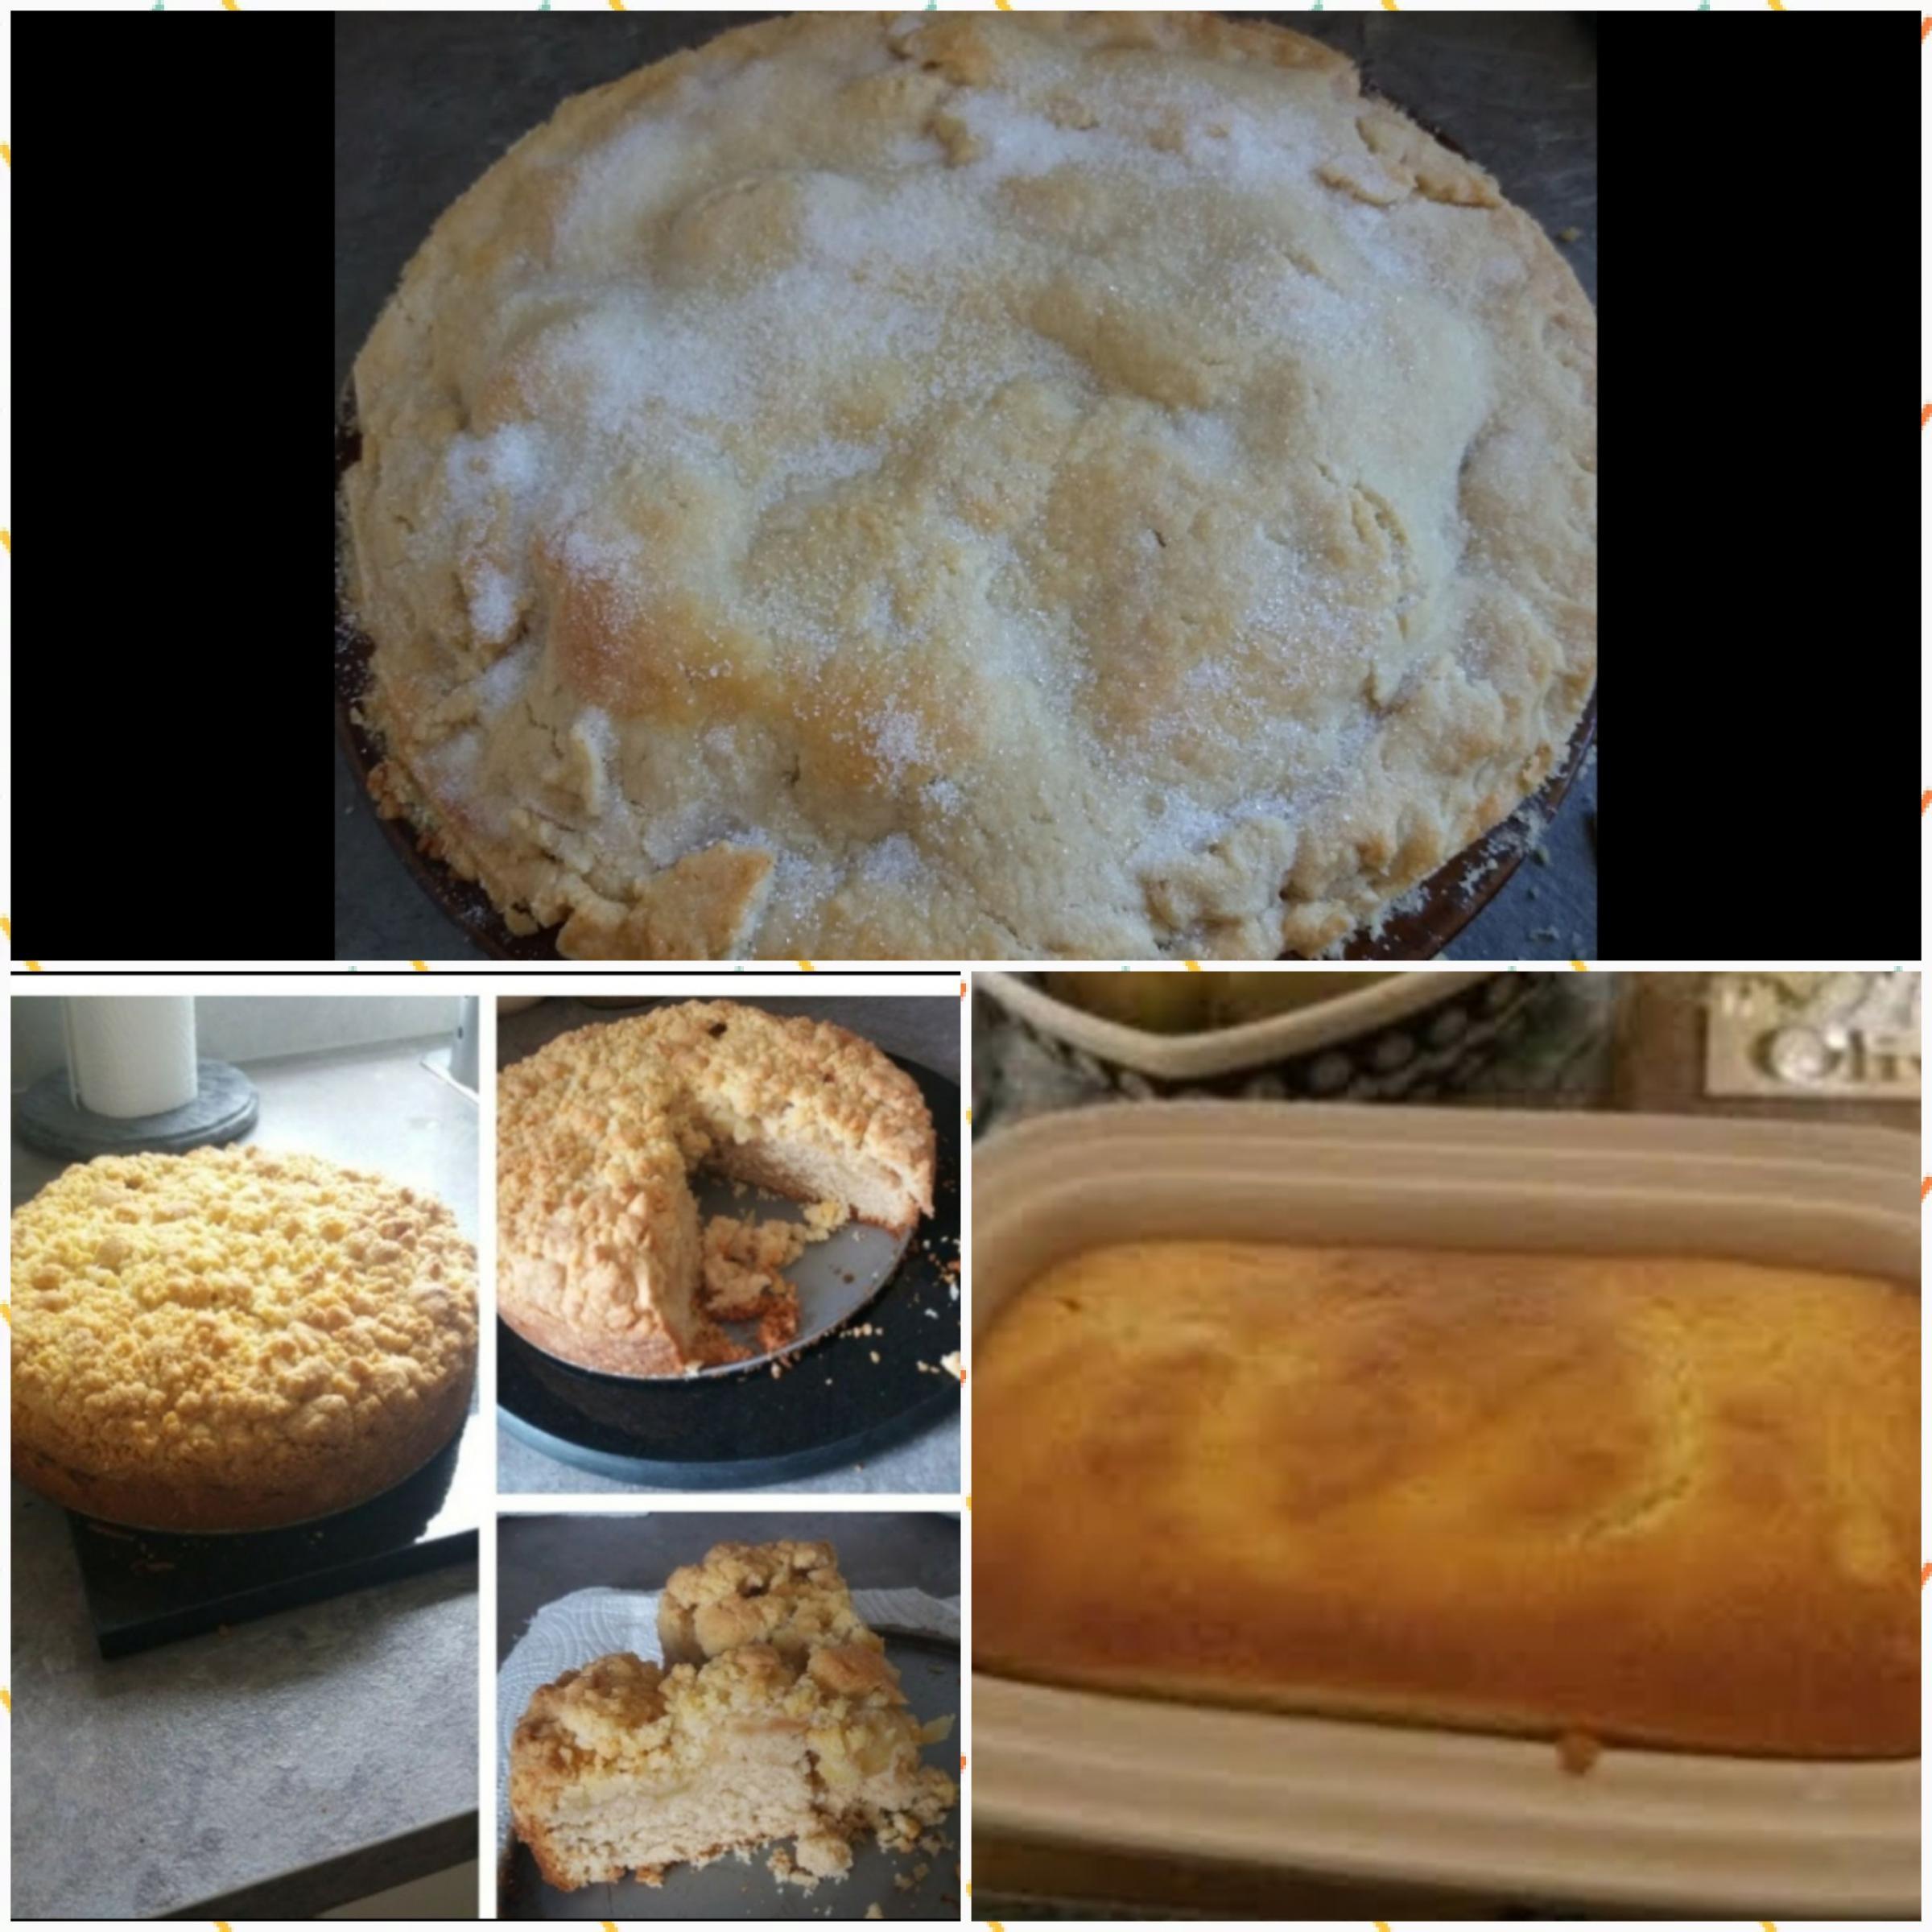 Apple pie, Eve’s pudding and apple streusel cake